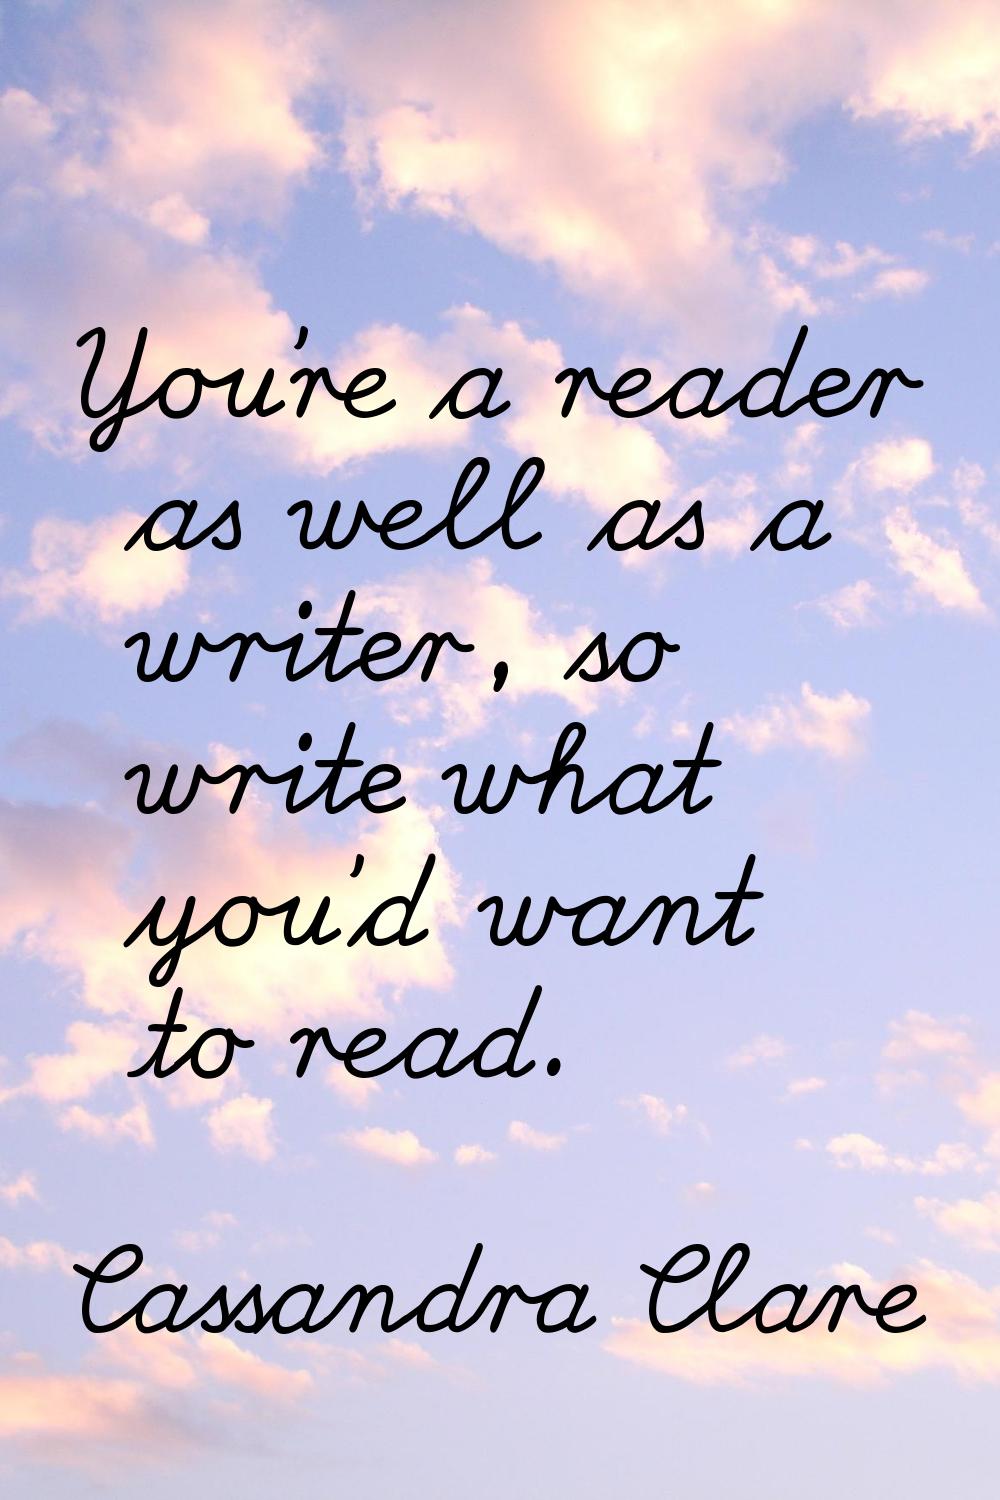 You're a reader as well as a writer, so write what you'd want to read.